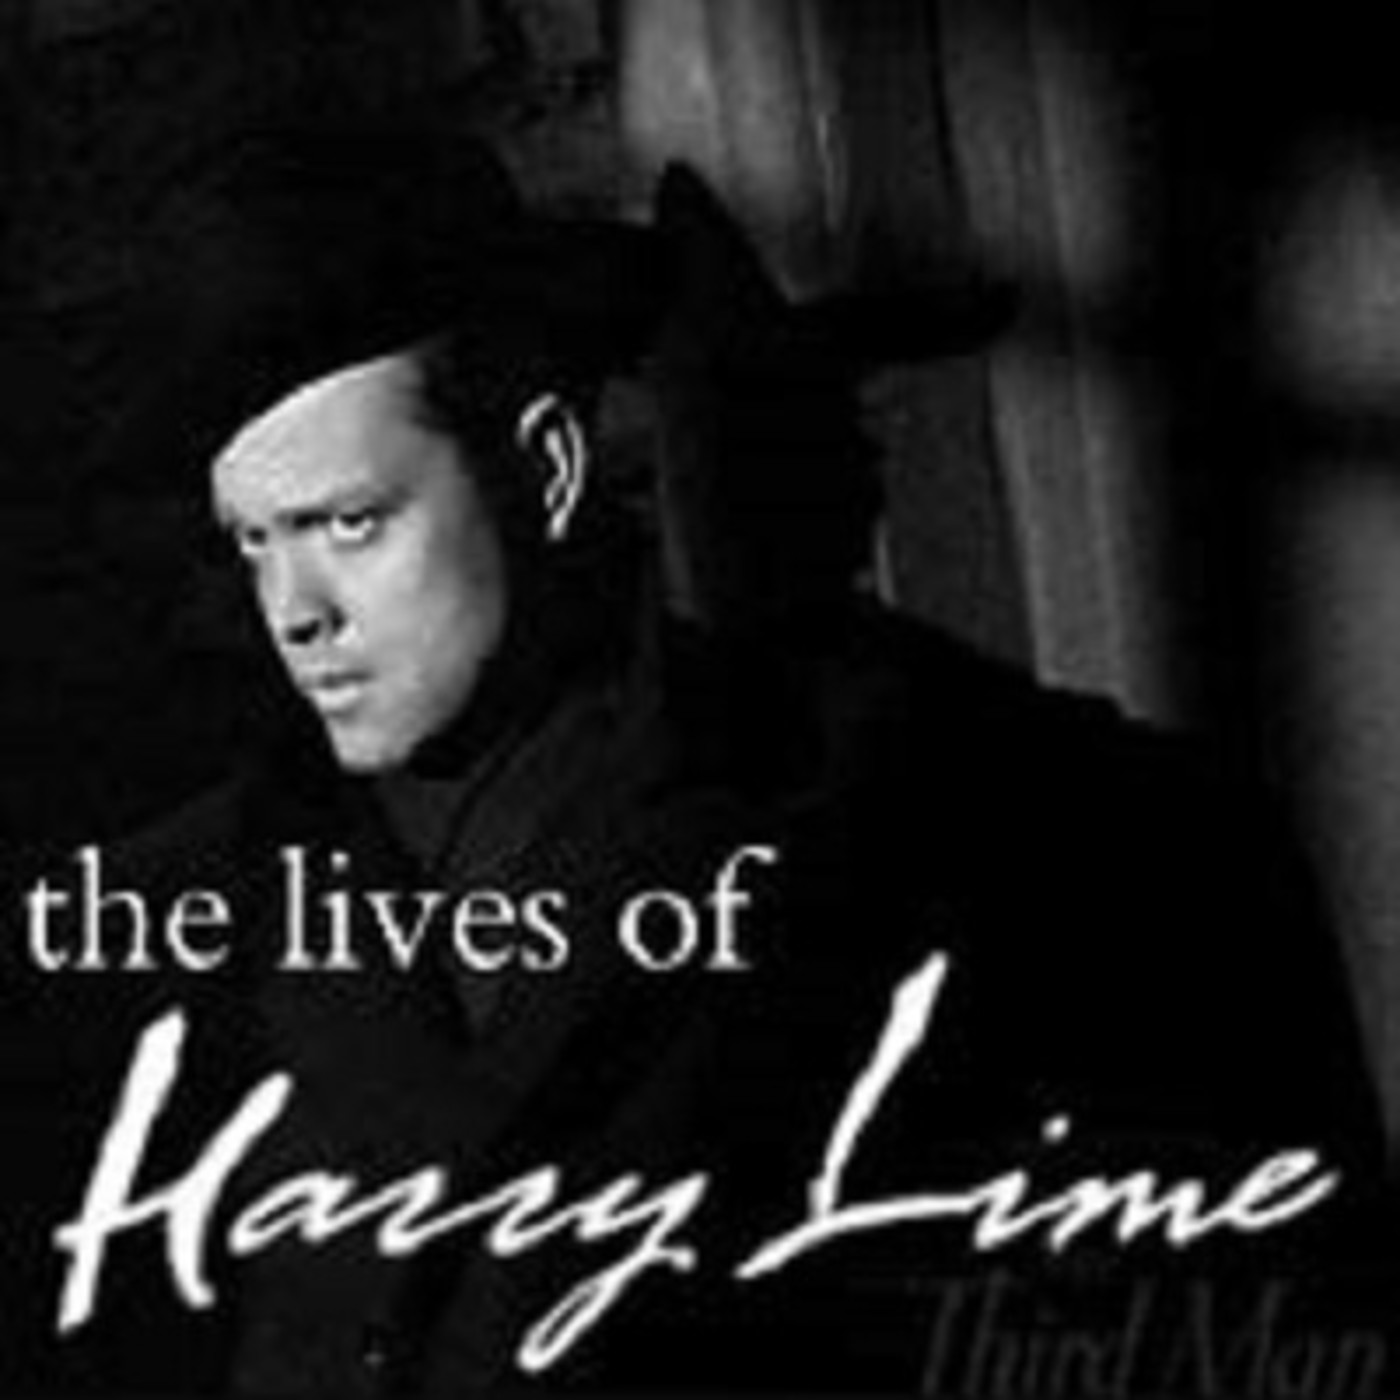 Harry Lime 02-15-52 - Dead Candidate